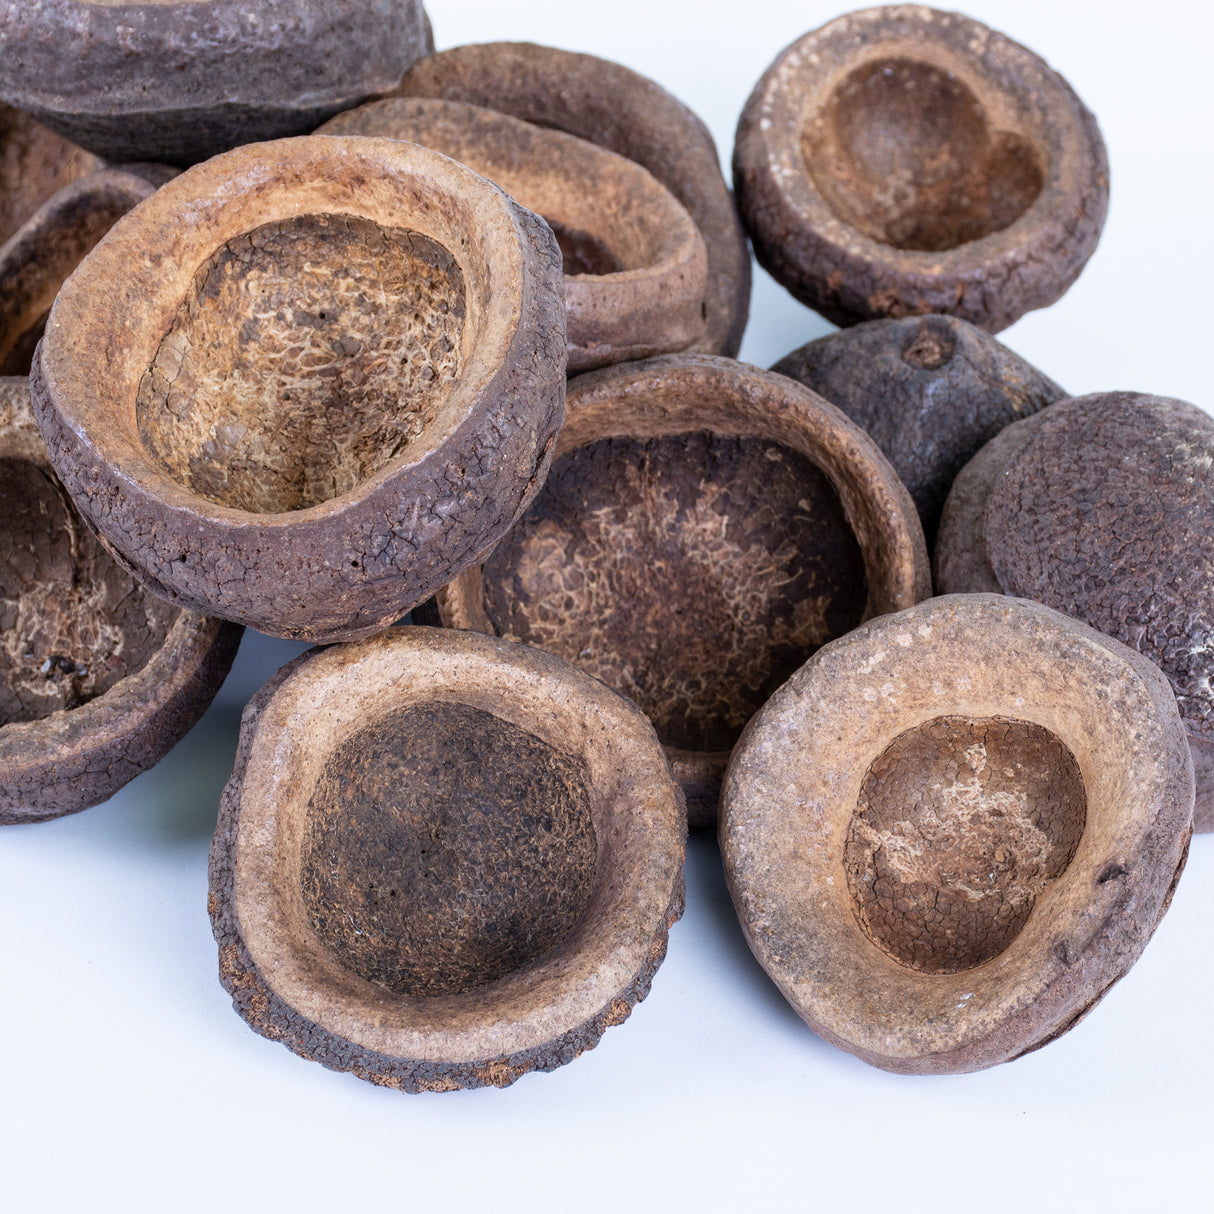 This image shows a group of Dried Natural Chapeuzinho against a white background